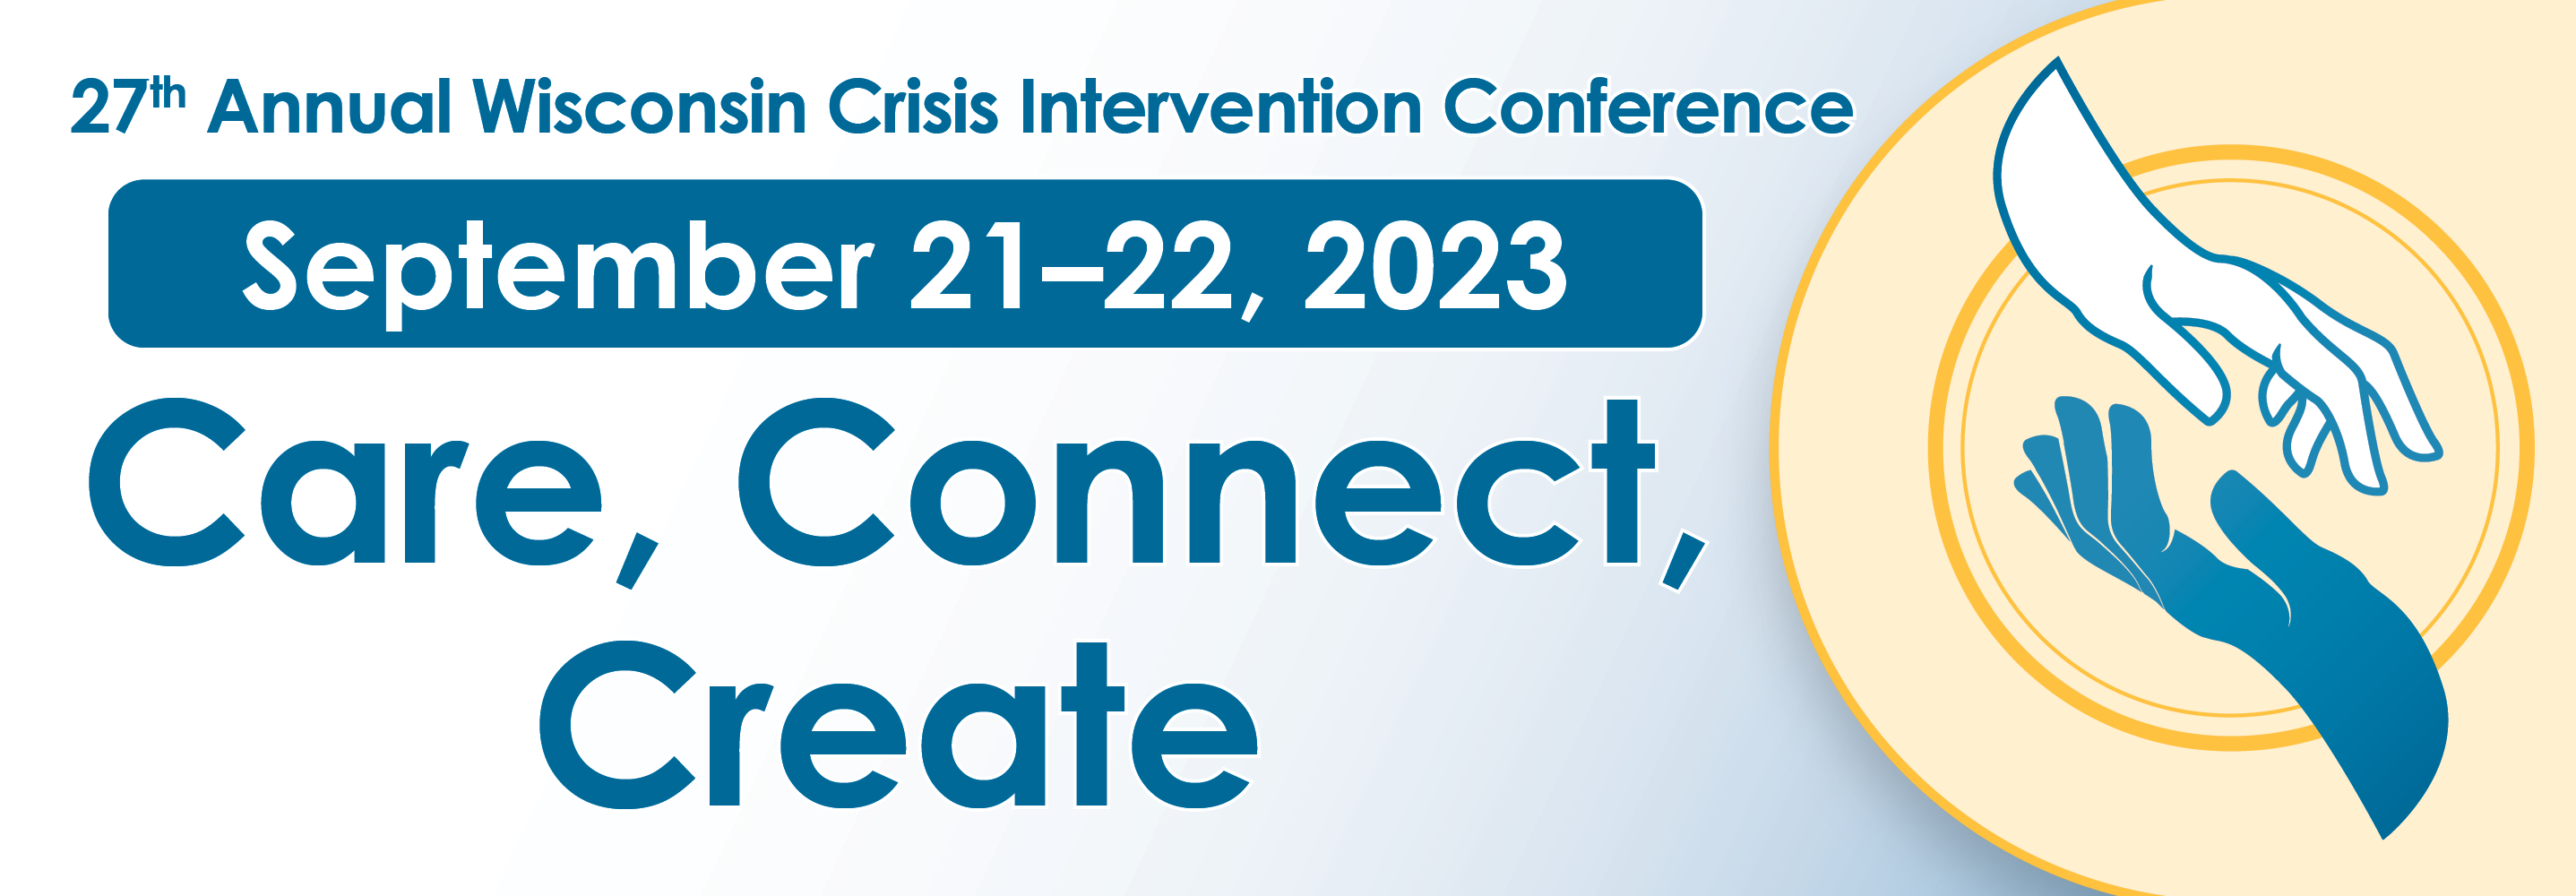 Crisis Intervention Conference - Continuing Education and Outreach